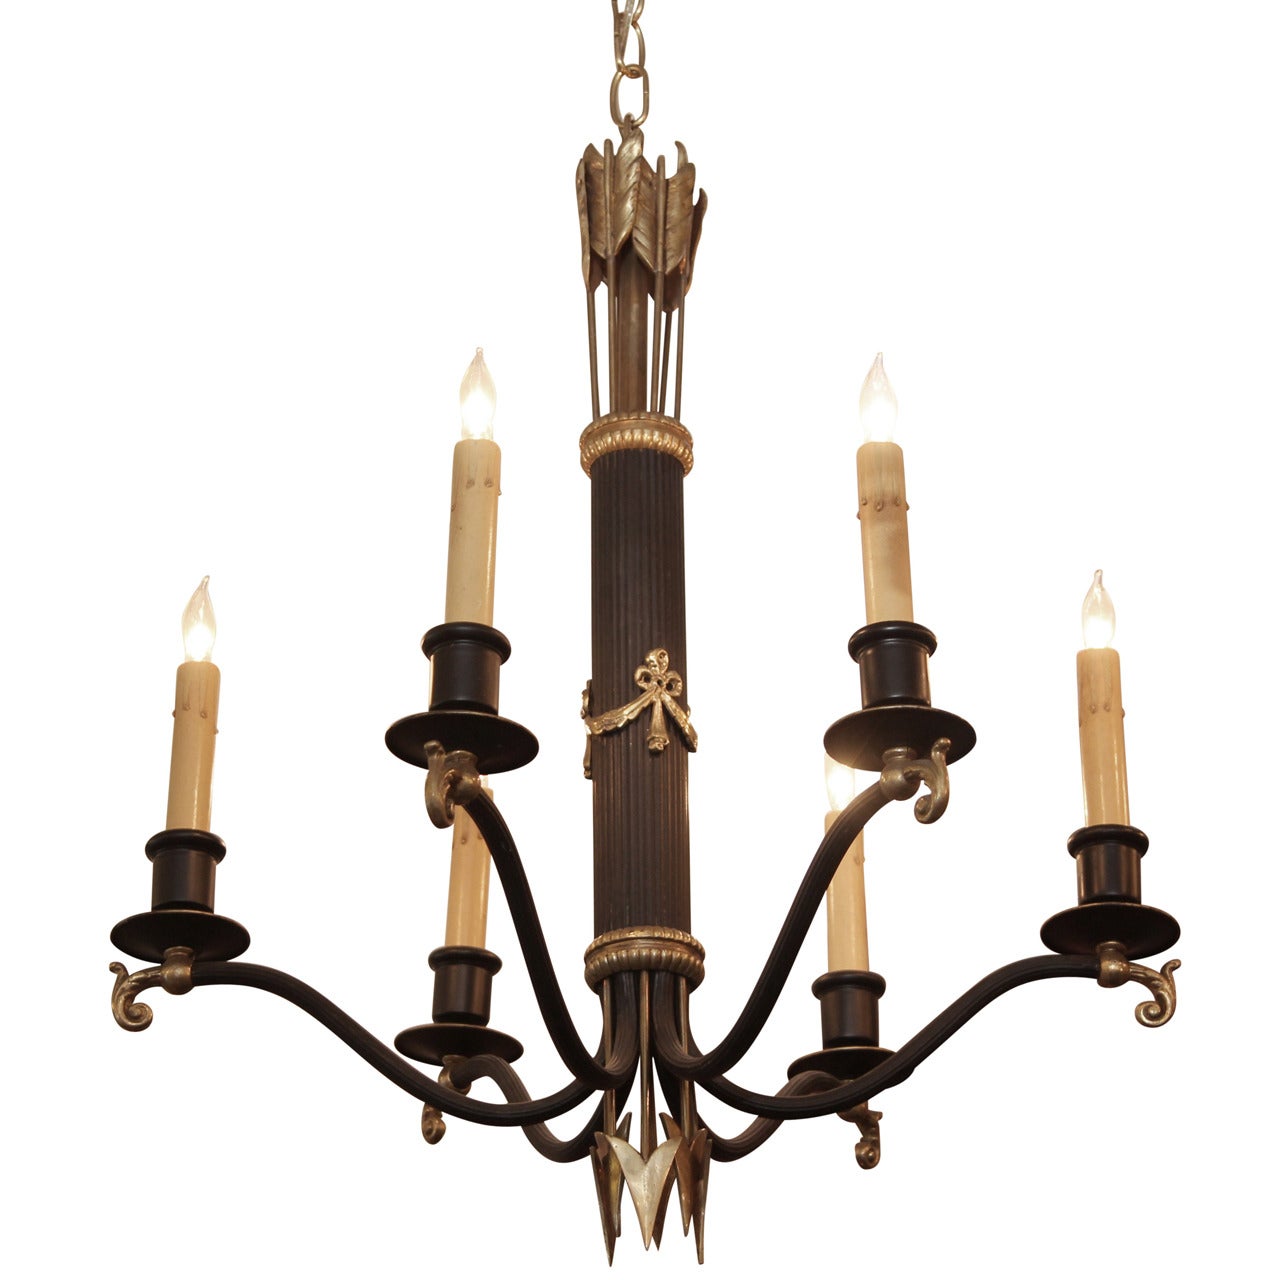 1930s French Regency Gold and Black Six-Light Chandelier with Swags and Spears